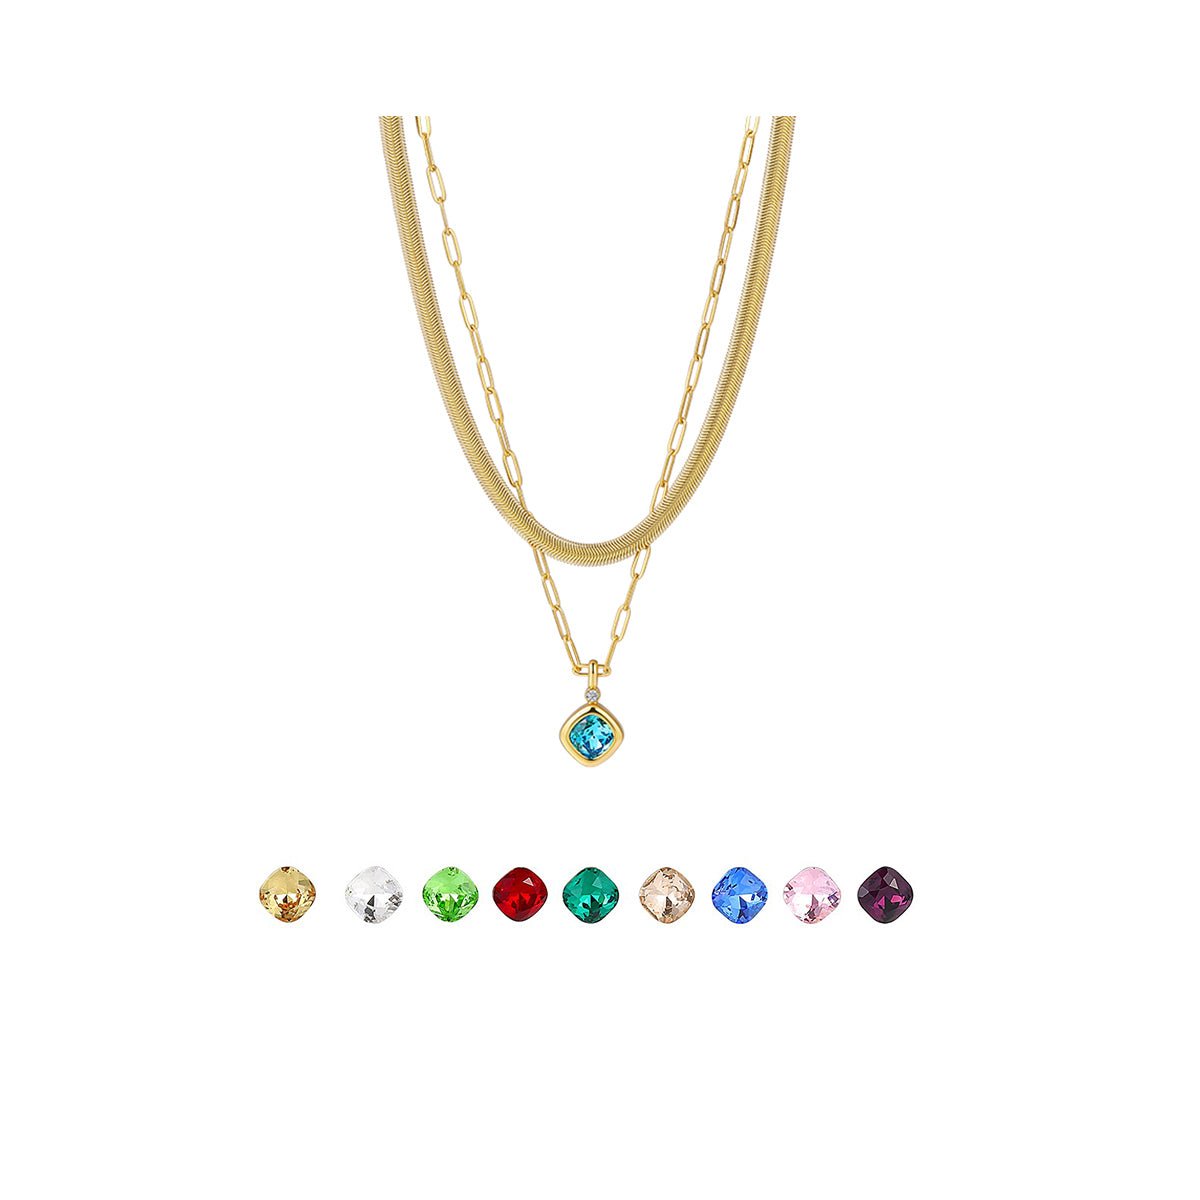 Replaceable Magic Candy Box Gold Necklace - 0cm